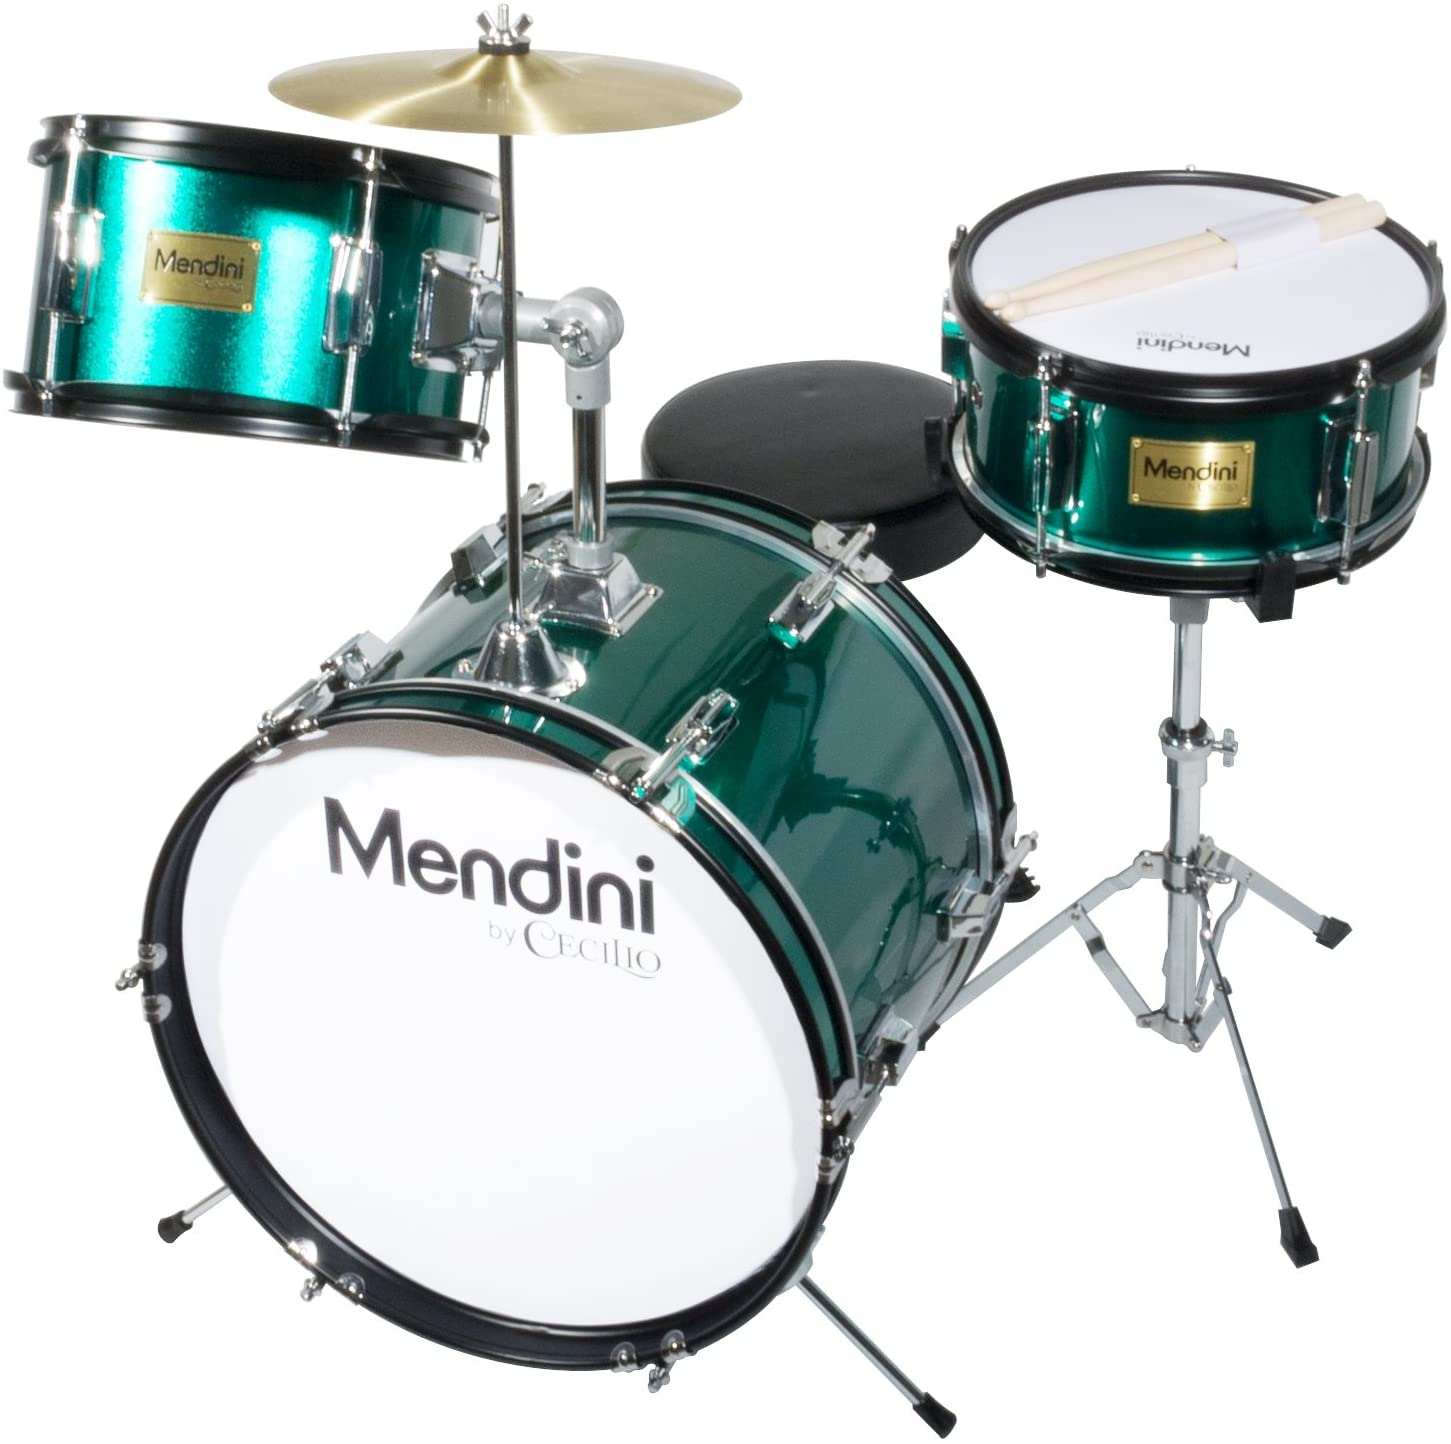 Mendini by Cecilio 16 inch 3-Piece Kids/Junior Drum Set with Adjustable Throne, Cymbal, Pedal & Drumsticks, Metallic Green, MJDS-3-GN 29